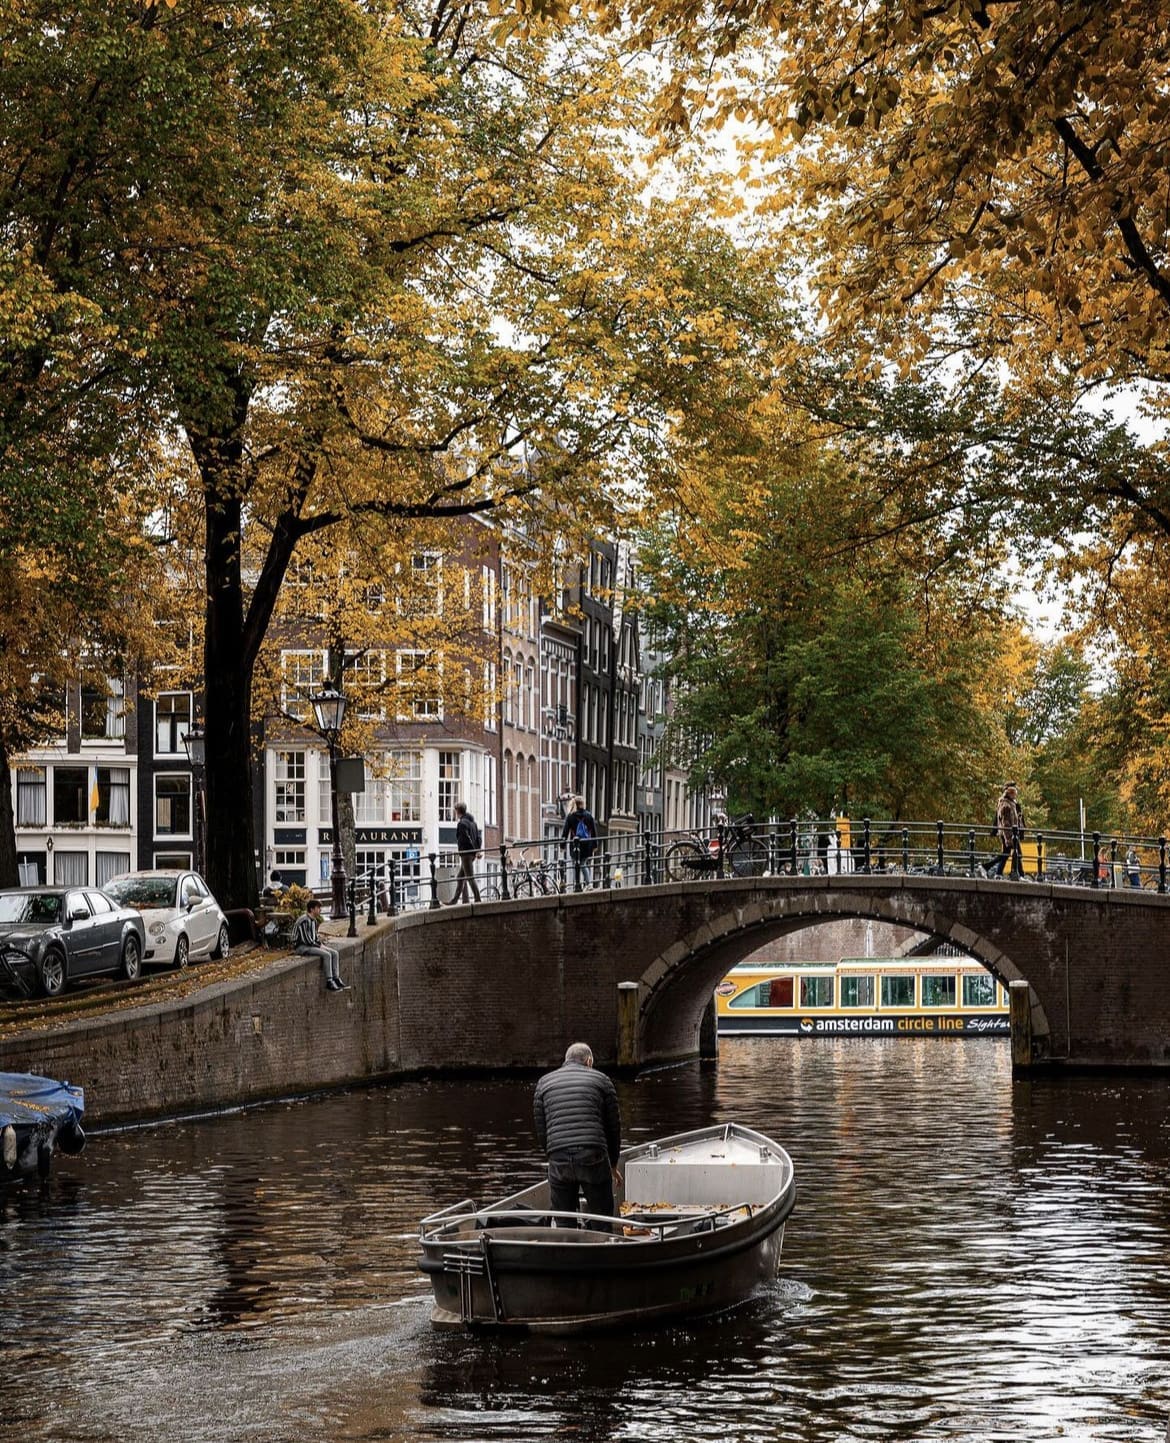 Cruise the Canals by Boat